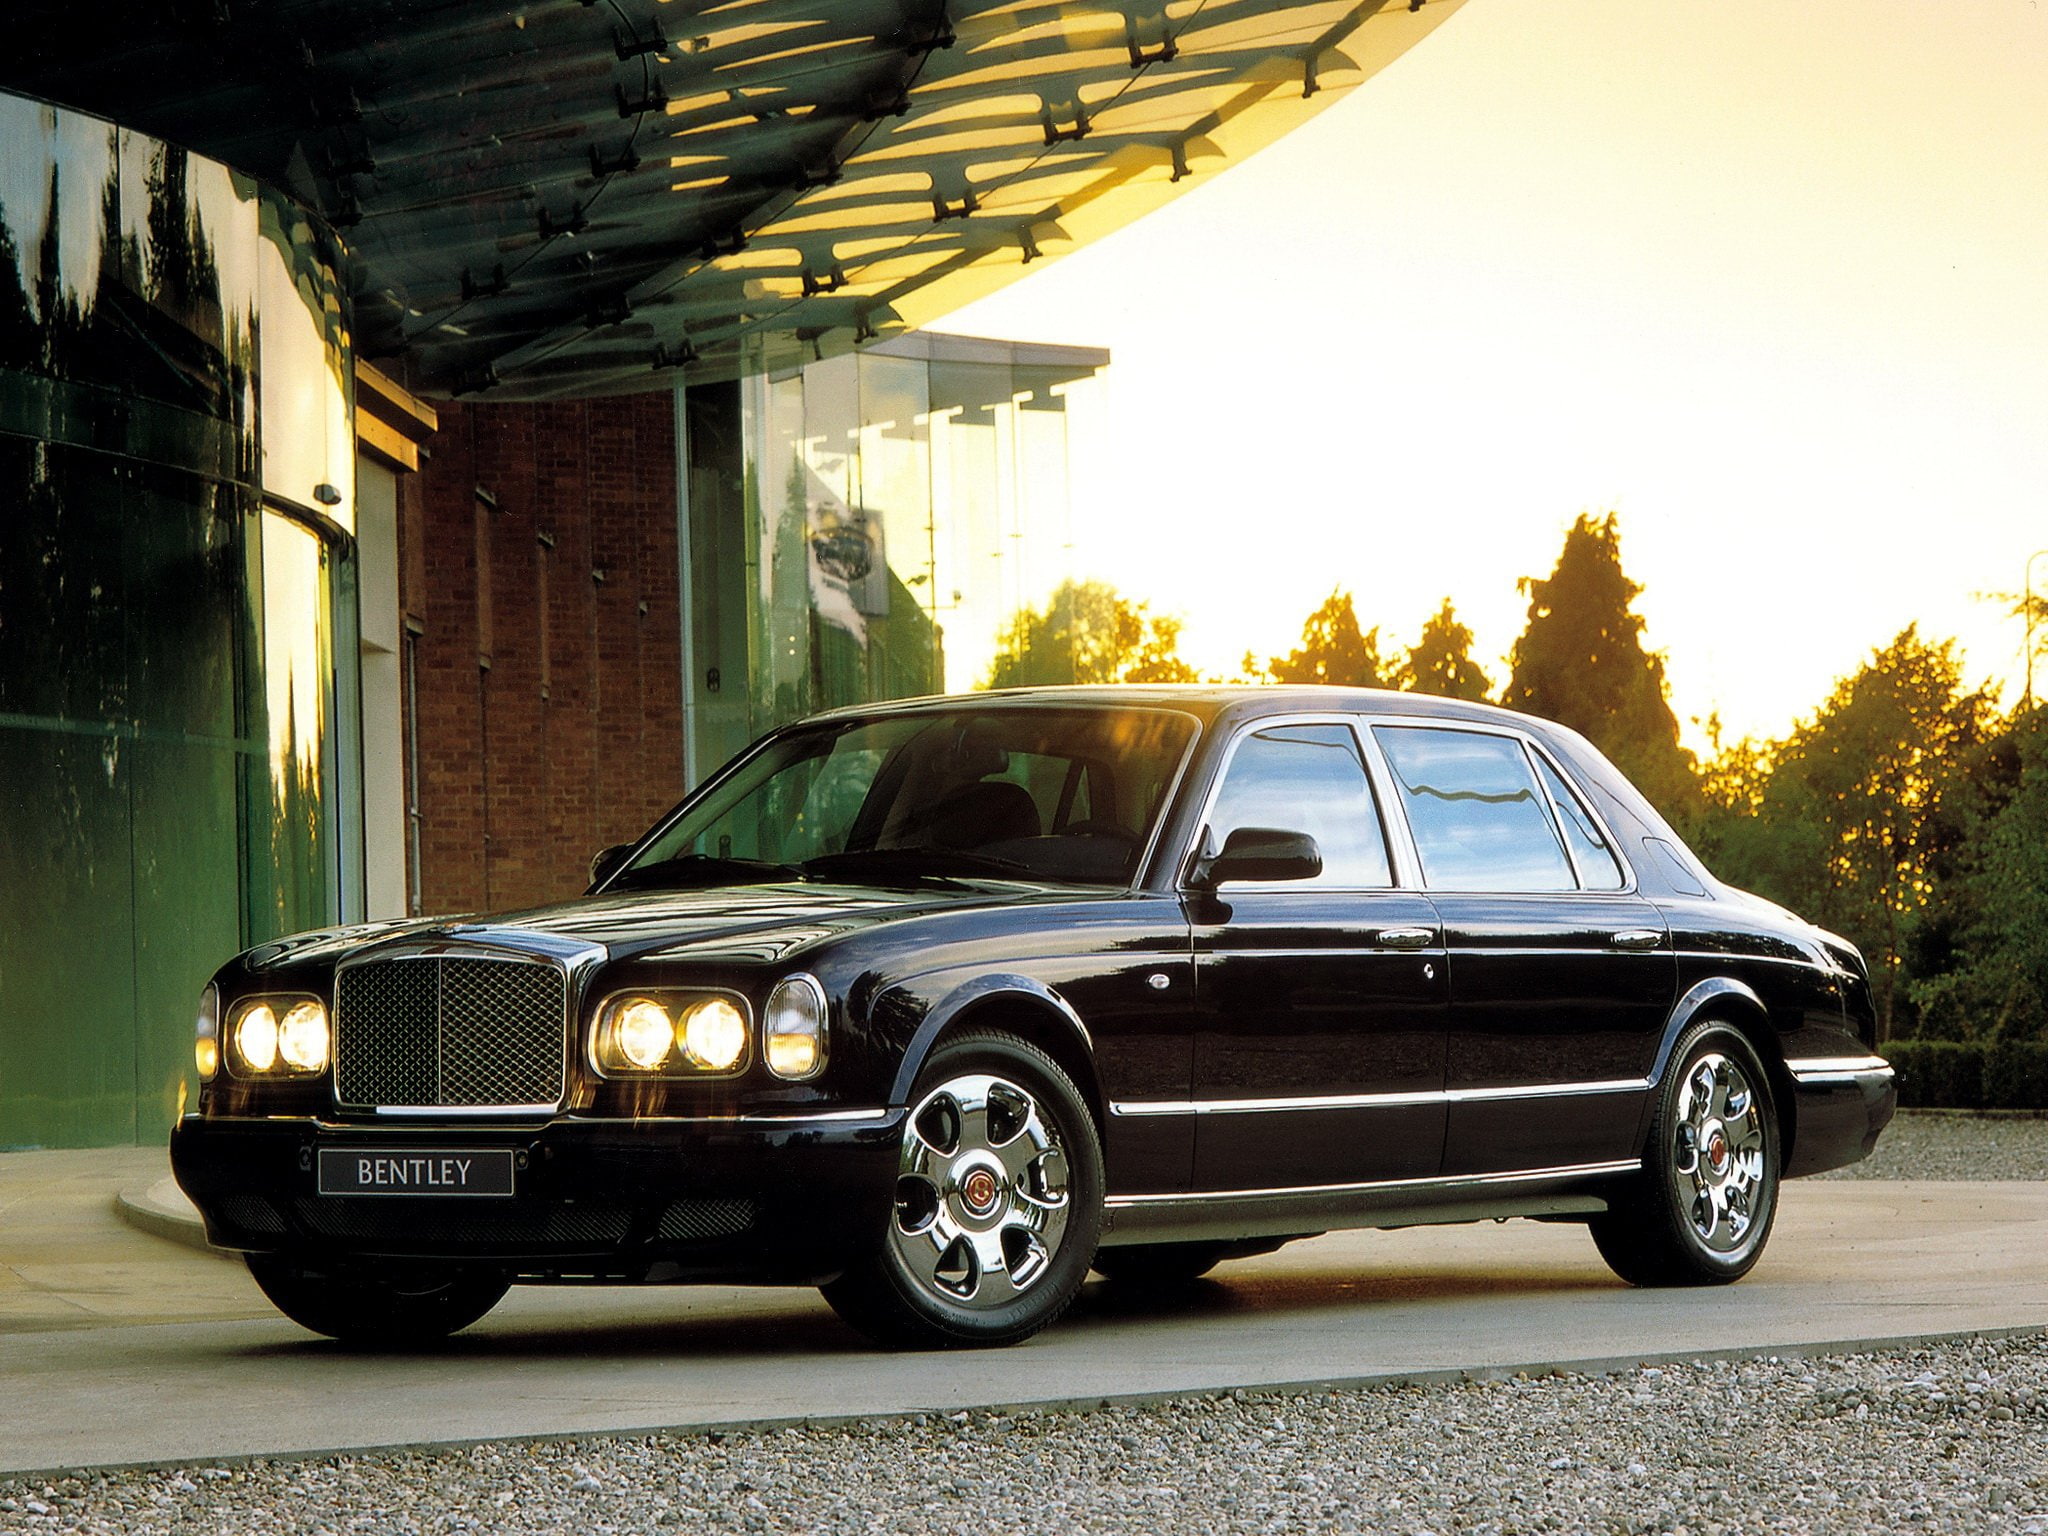 2001, arnage, bentley, commission, label, lwb, personal, red